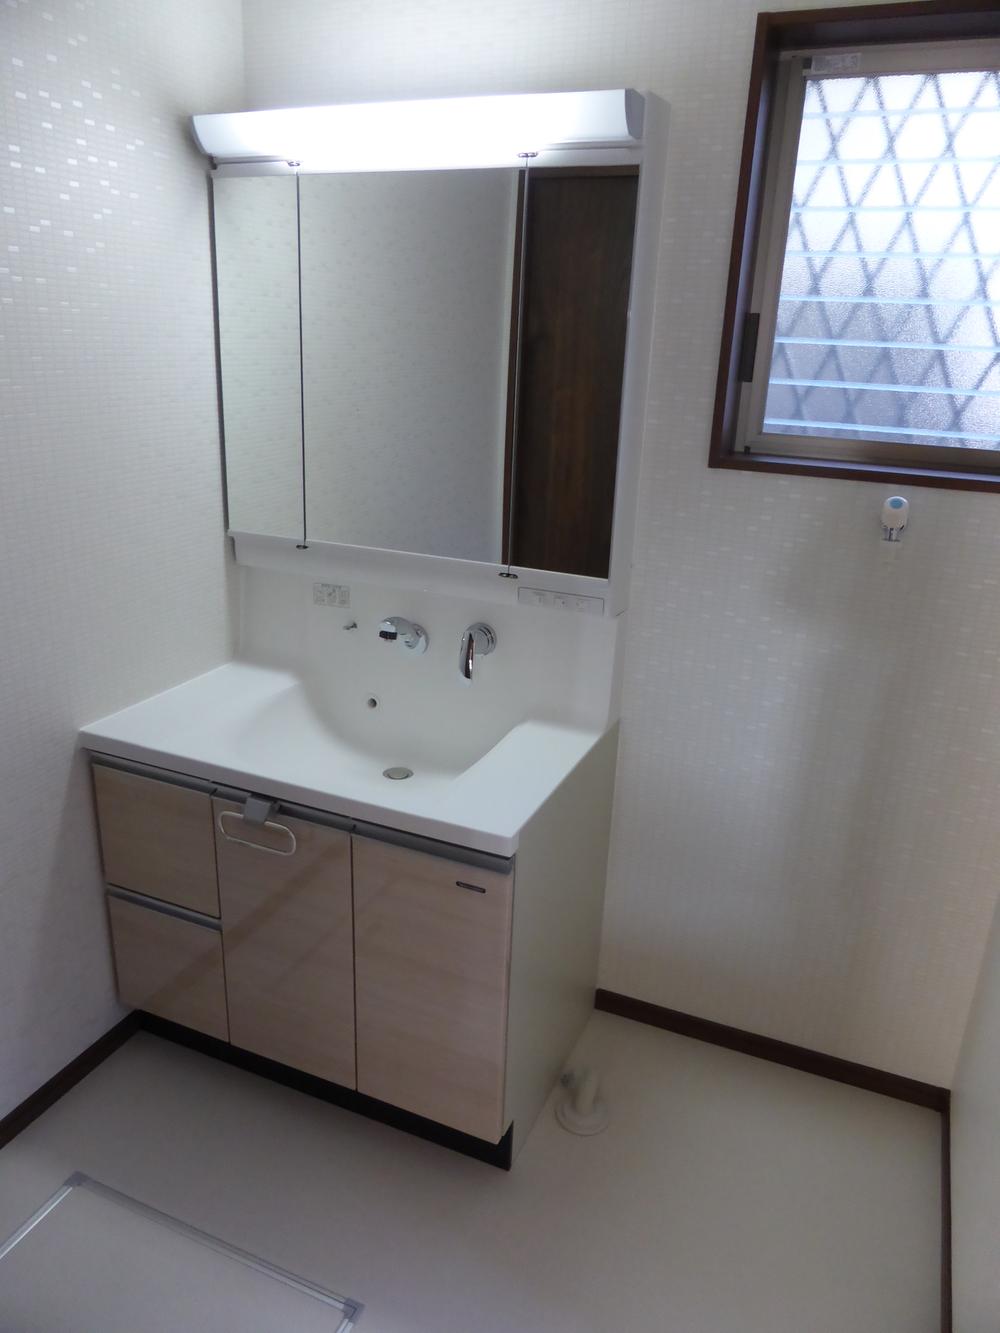 Wash basin, toilet. Washstand was spacious of 90cm. You can also ventilation because there is also a window